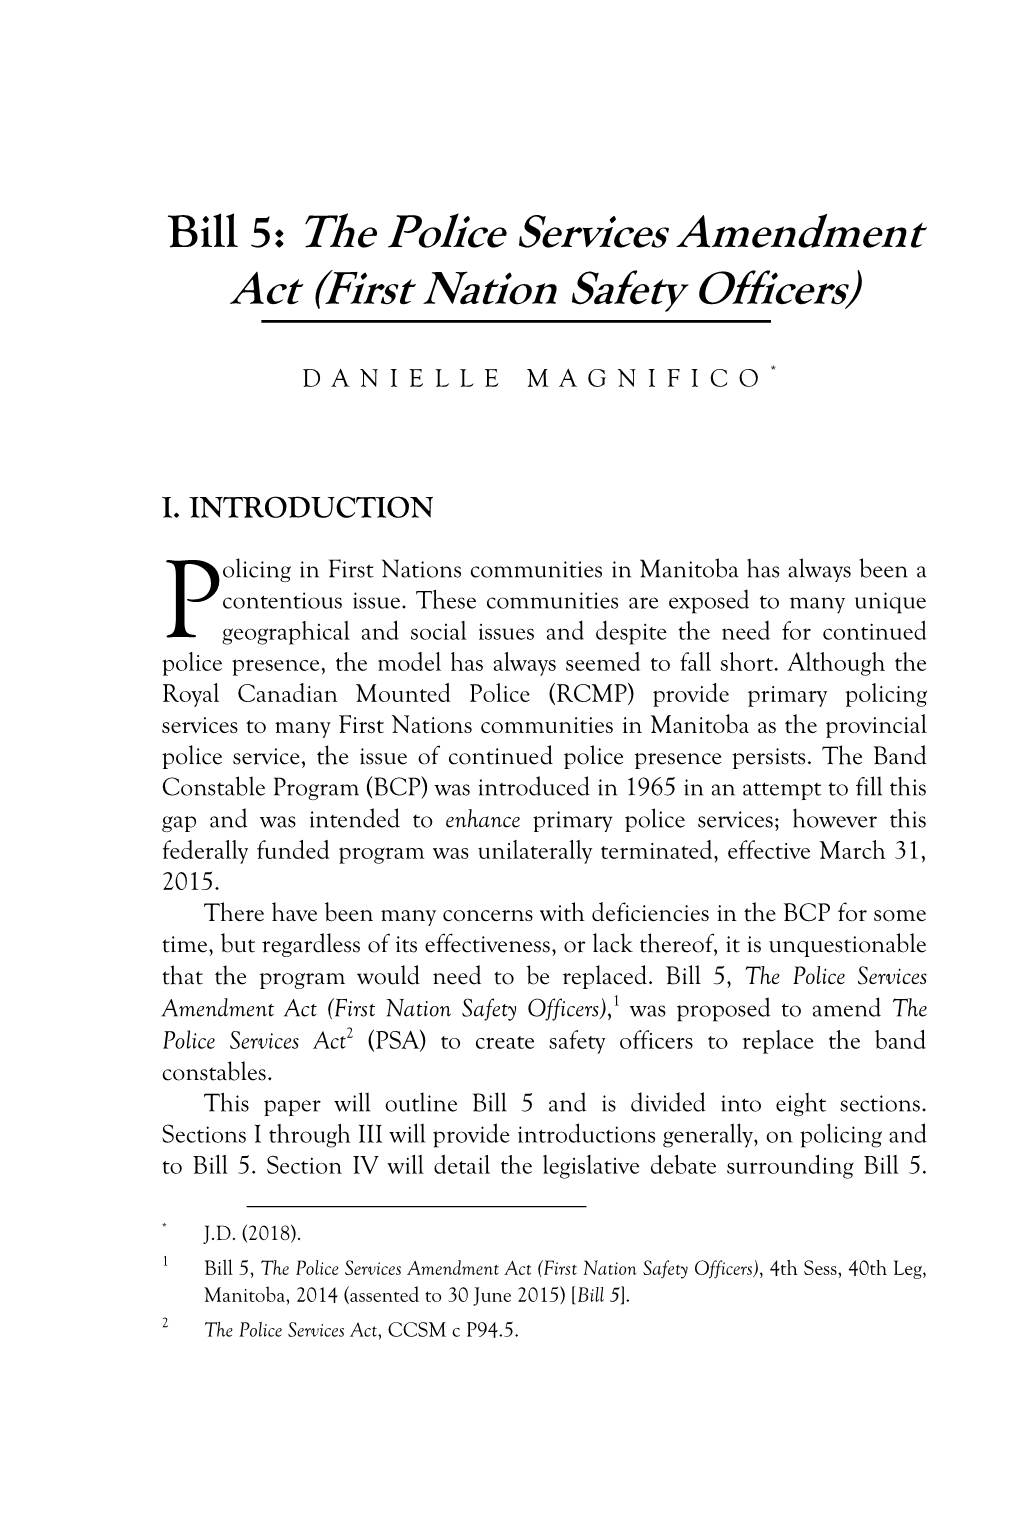 The Police Services Amendment Act (First Nation Safety Officers)